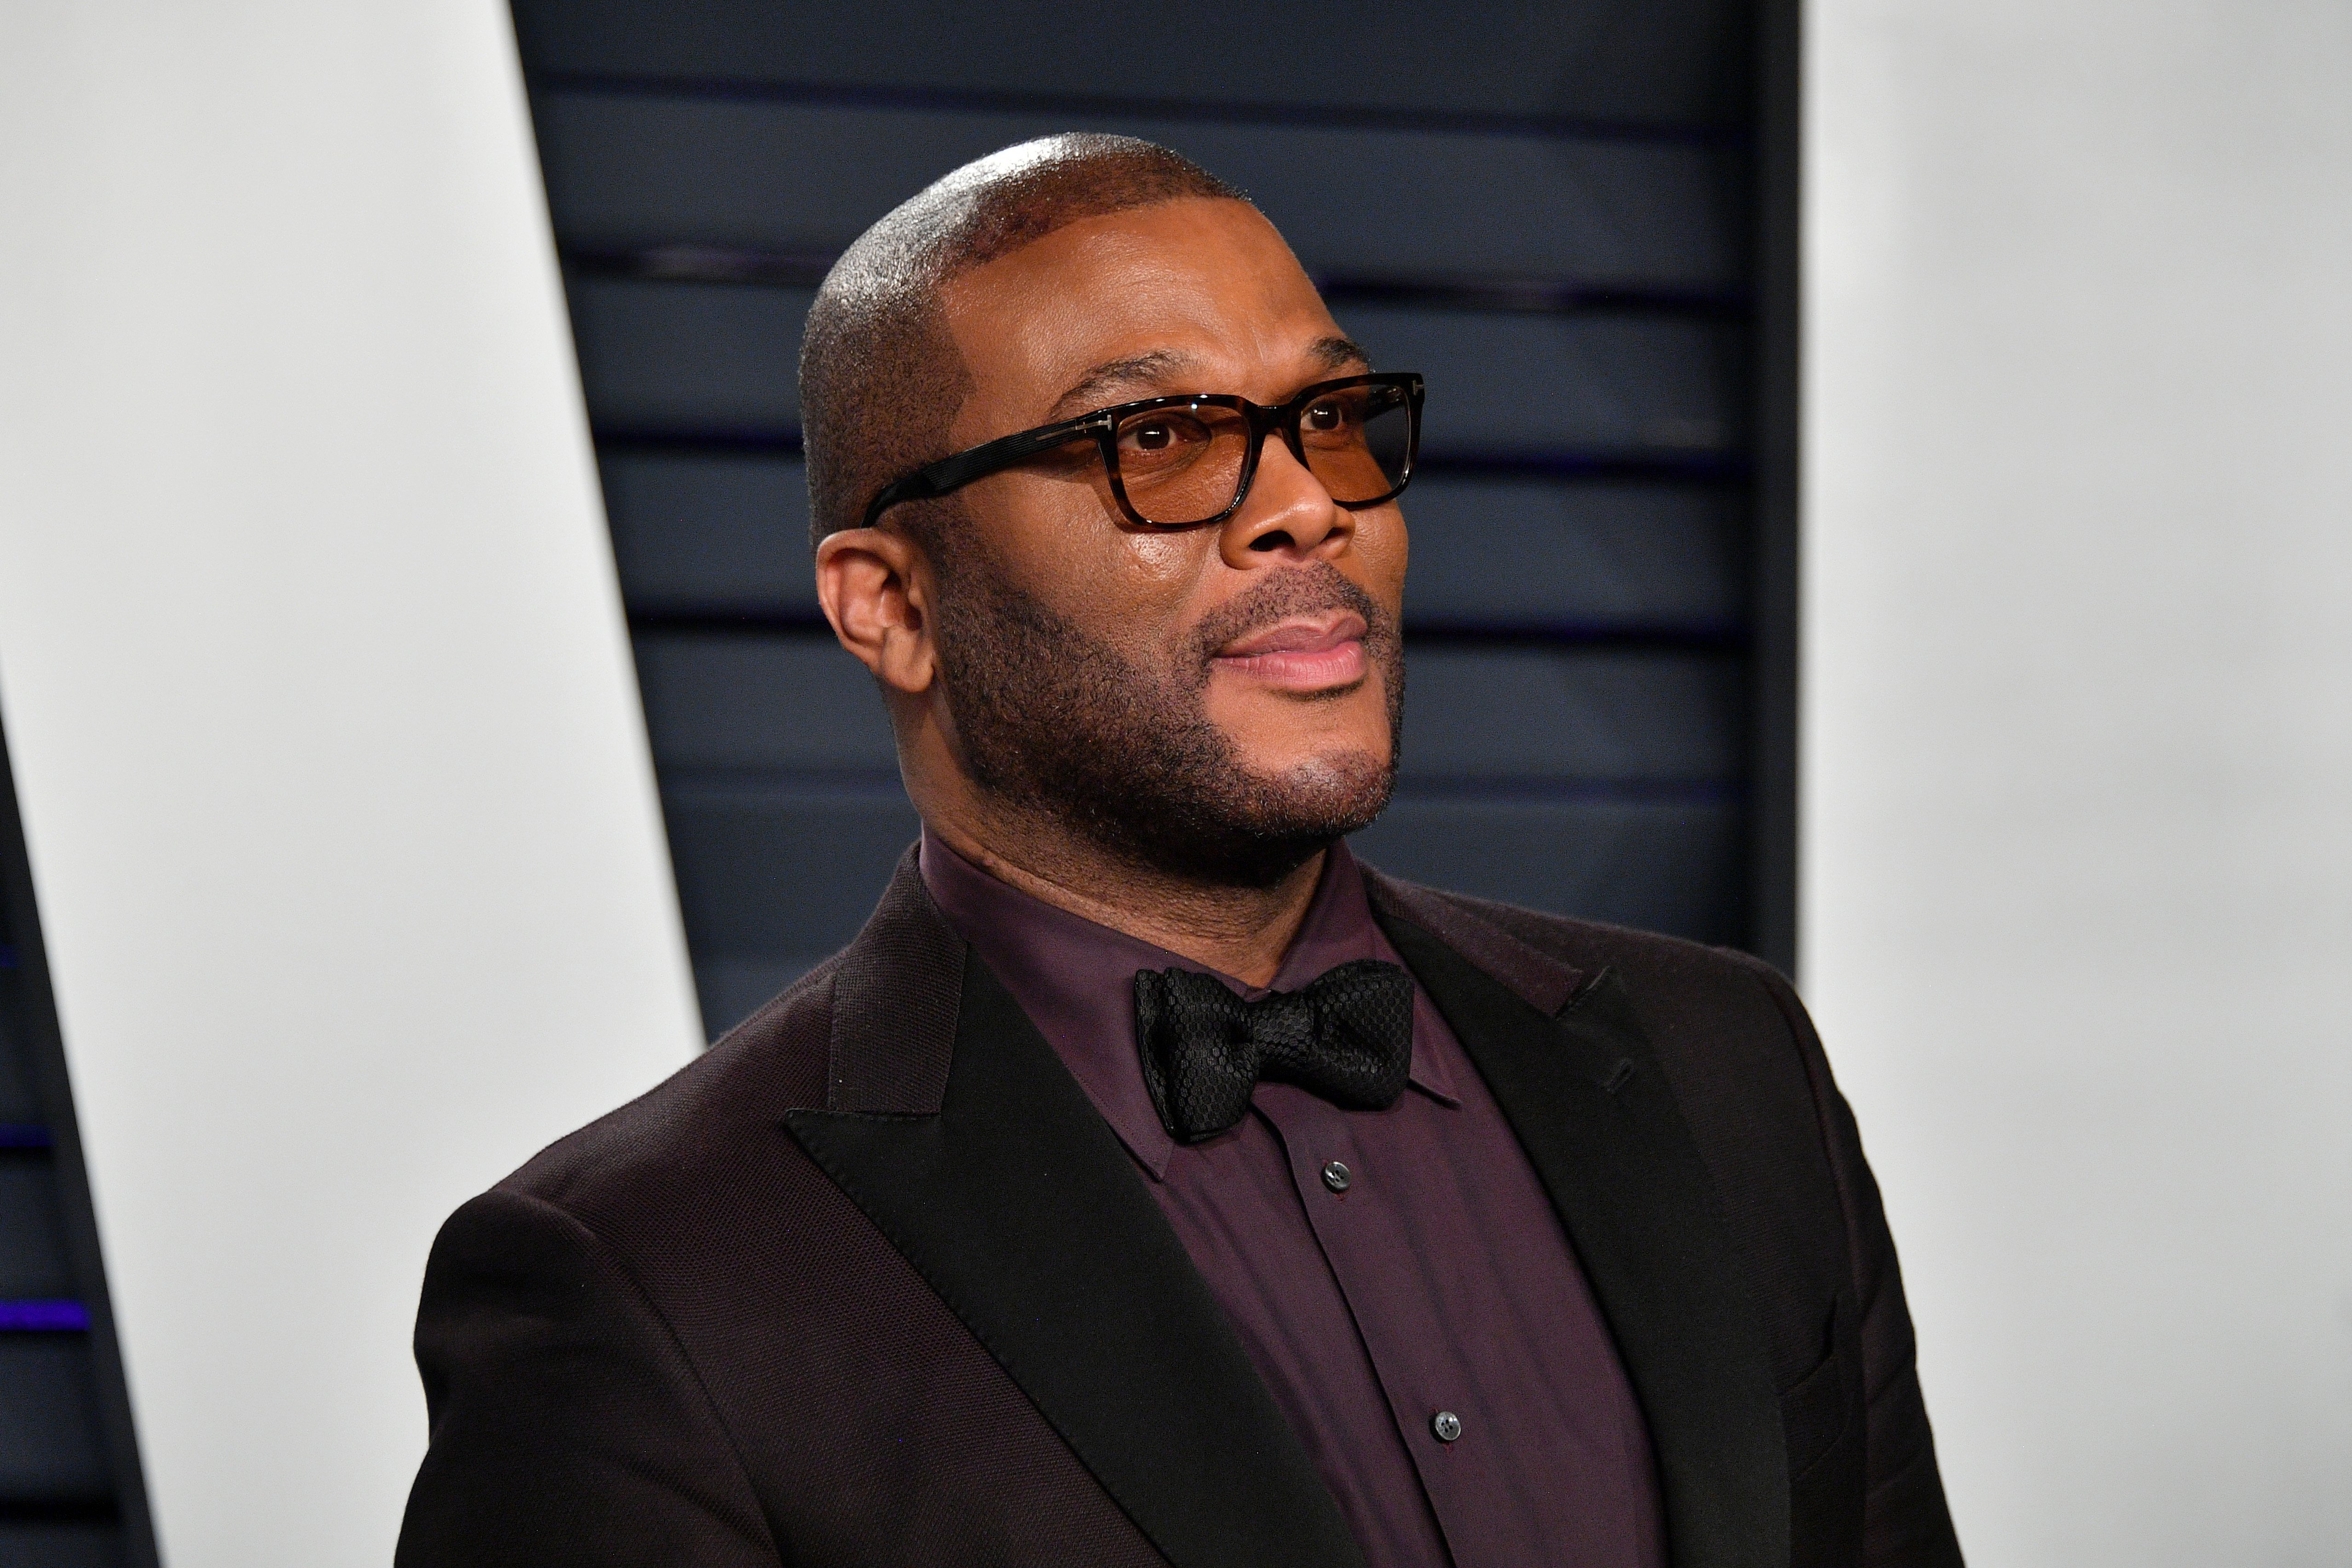  Tyler Perry attends the 2019 Vanity Fair Oscar Party hosted by Radhika Jones at Wallis Annenberg Center for the Performing Arts on February 24, 2019| Photo: Getty Images